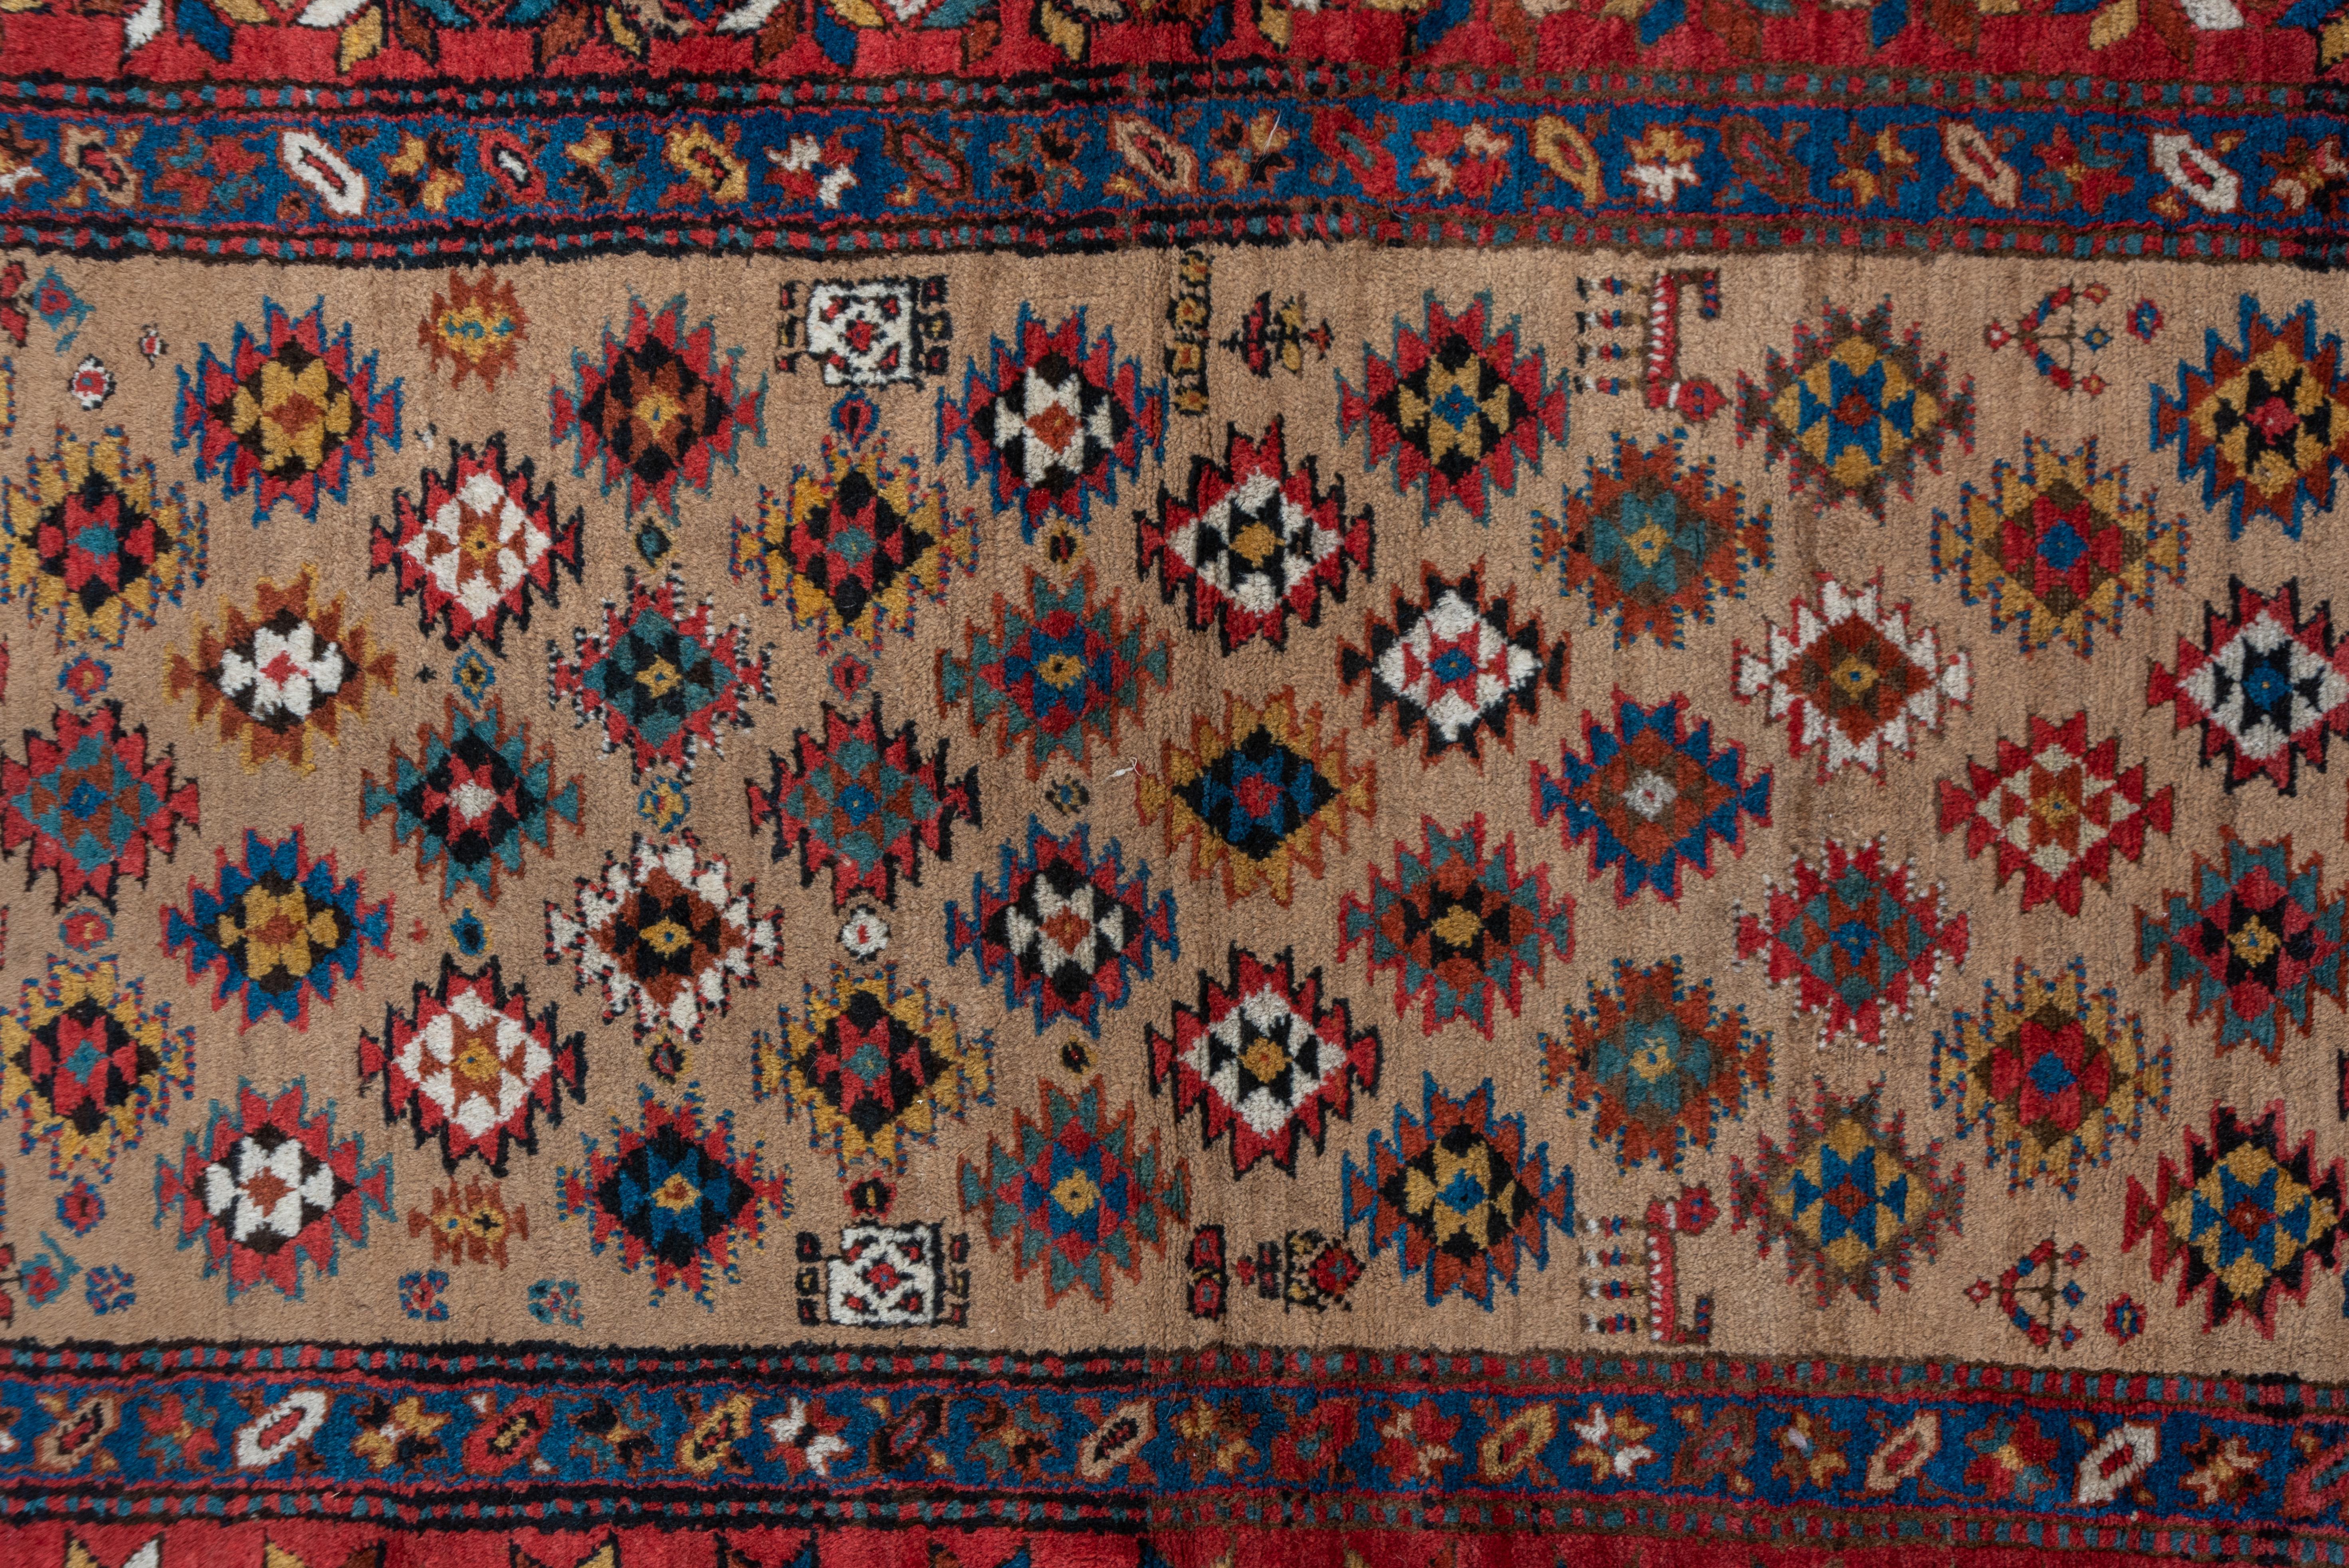 The beige camel ground shows a half-drop offset row pattern of larger and attendant smaller ashiks, along with small animals and flowers, detailed in off-white, medium blue, orange-rust, off black, straw and red. Main red ground border of polychrome